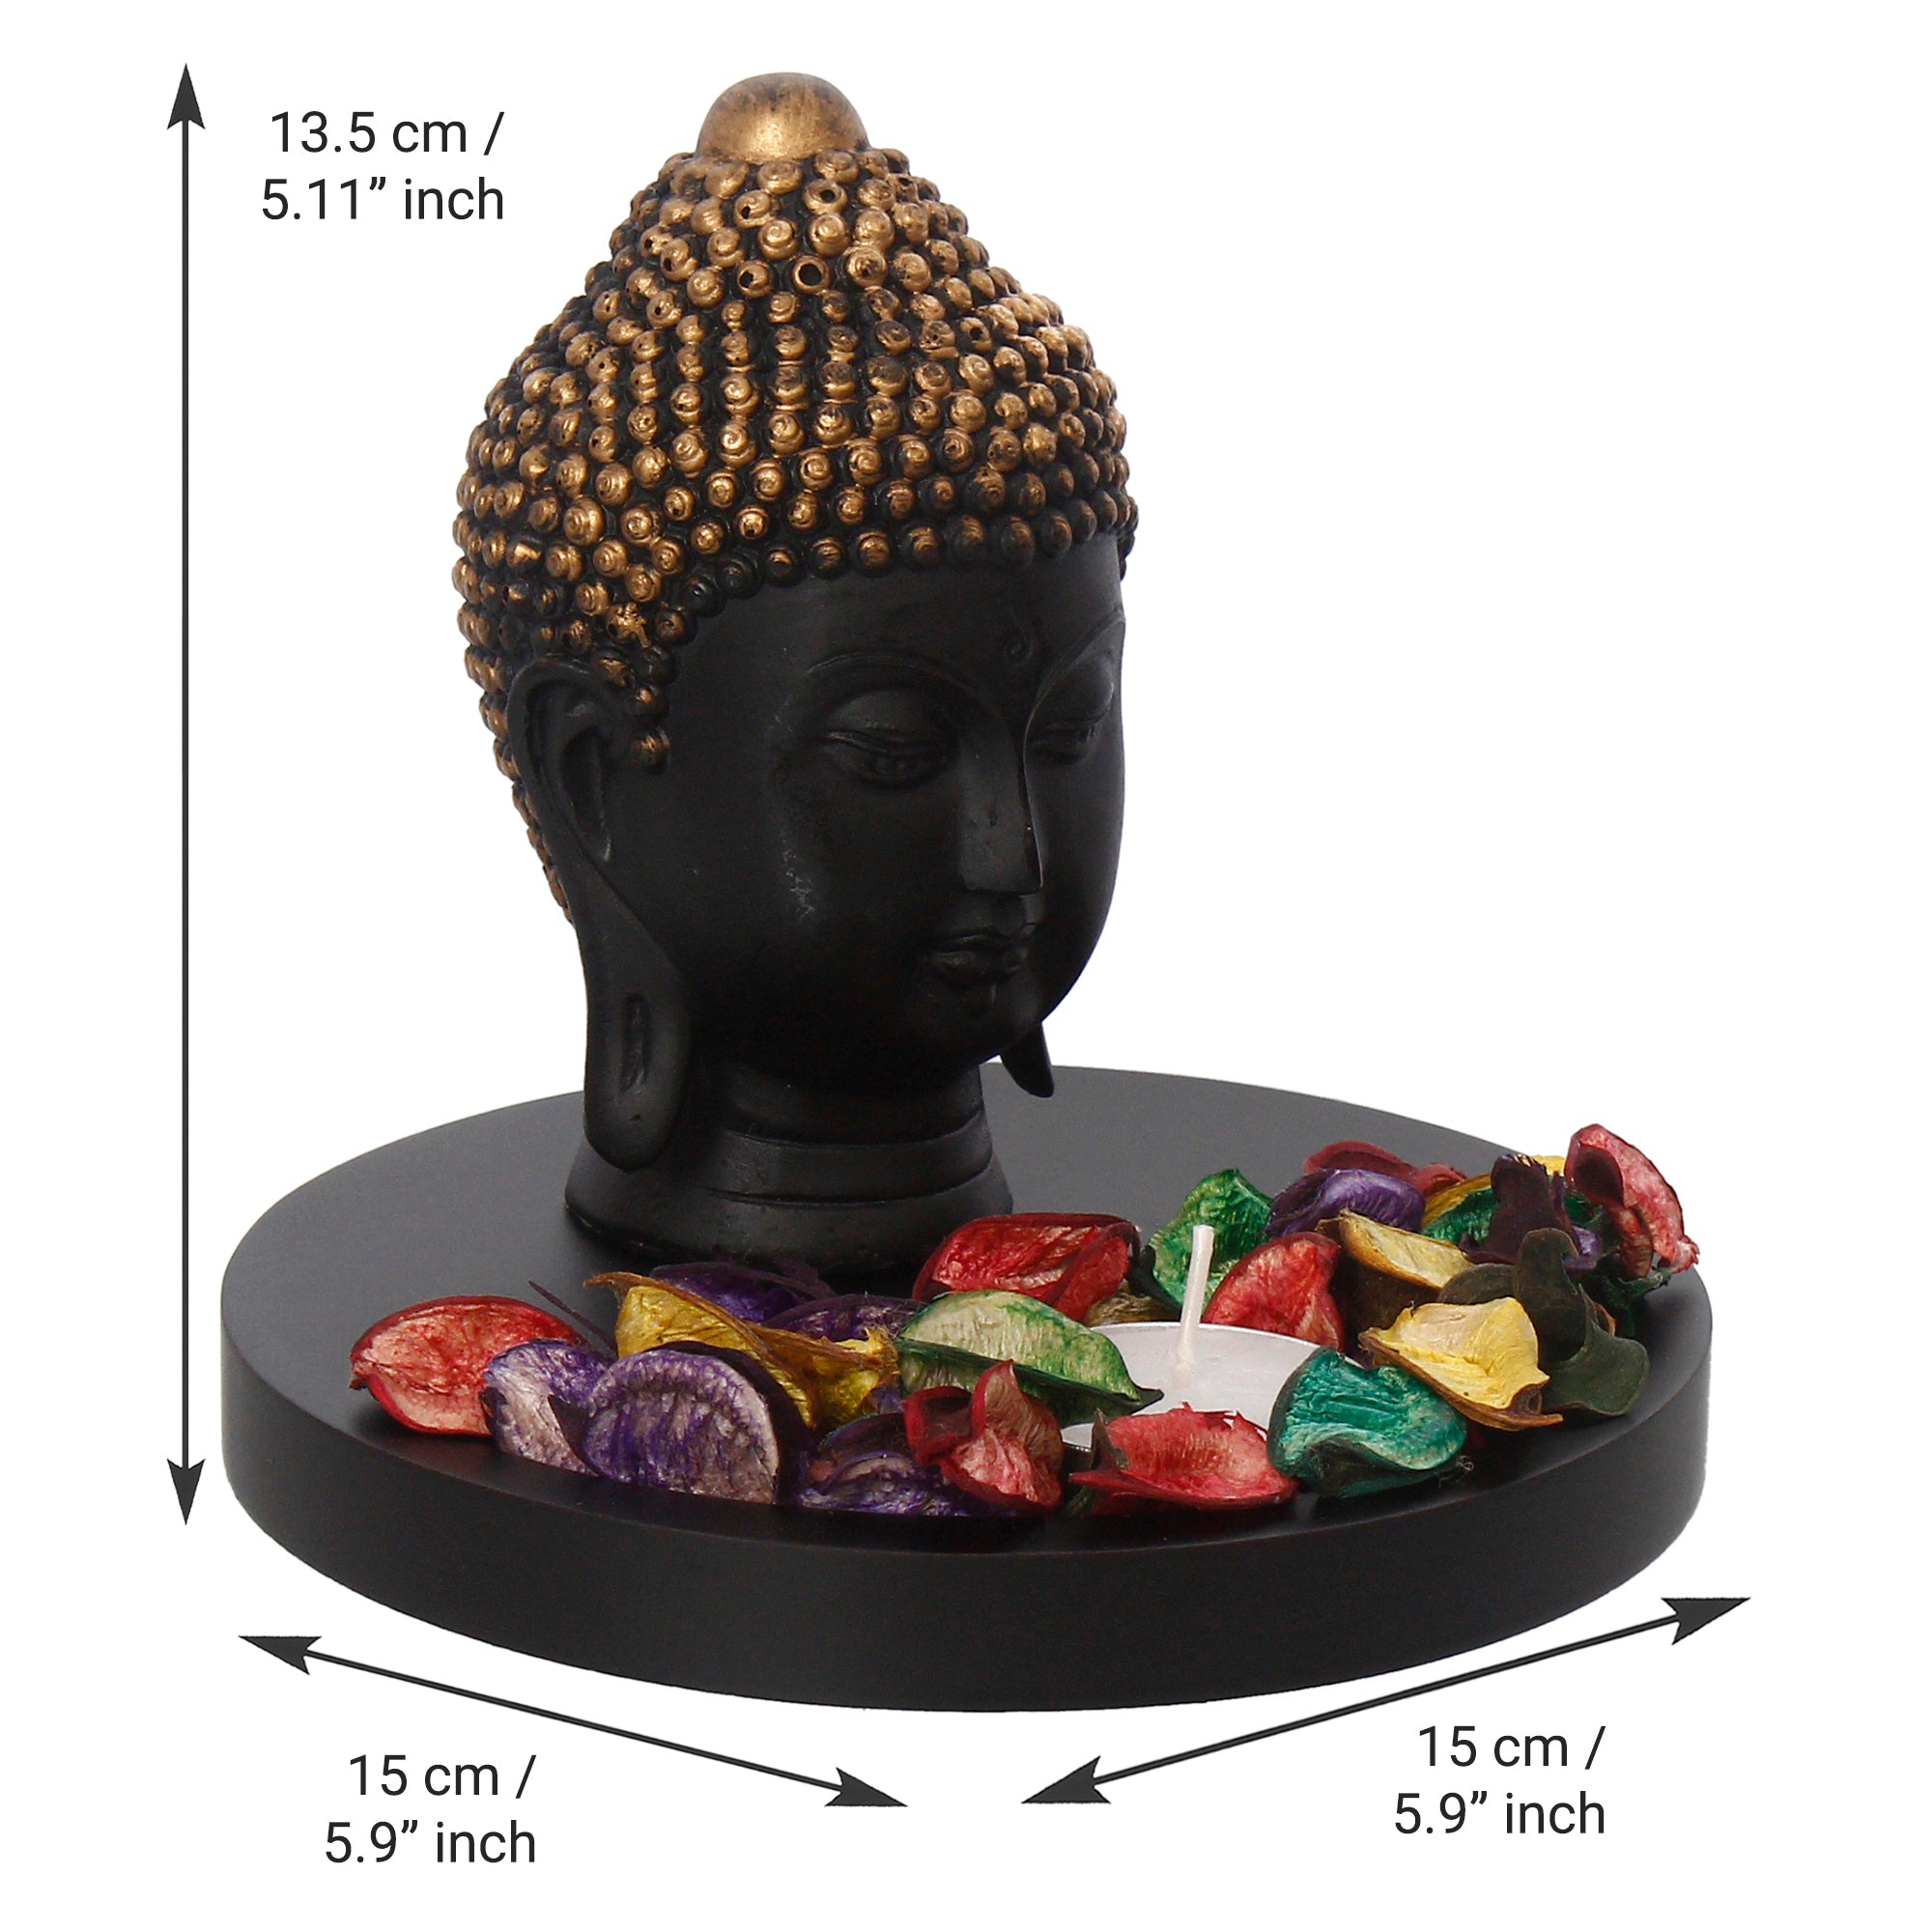 Decorative Black and Golden Buddha Head Statue with Wooden Base, Fragranced Petals and Tealight 3